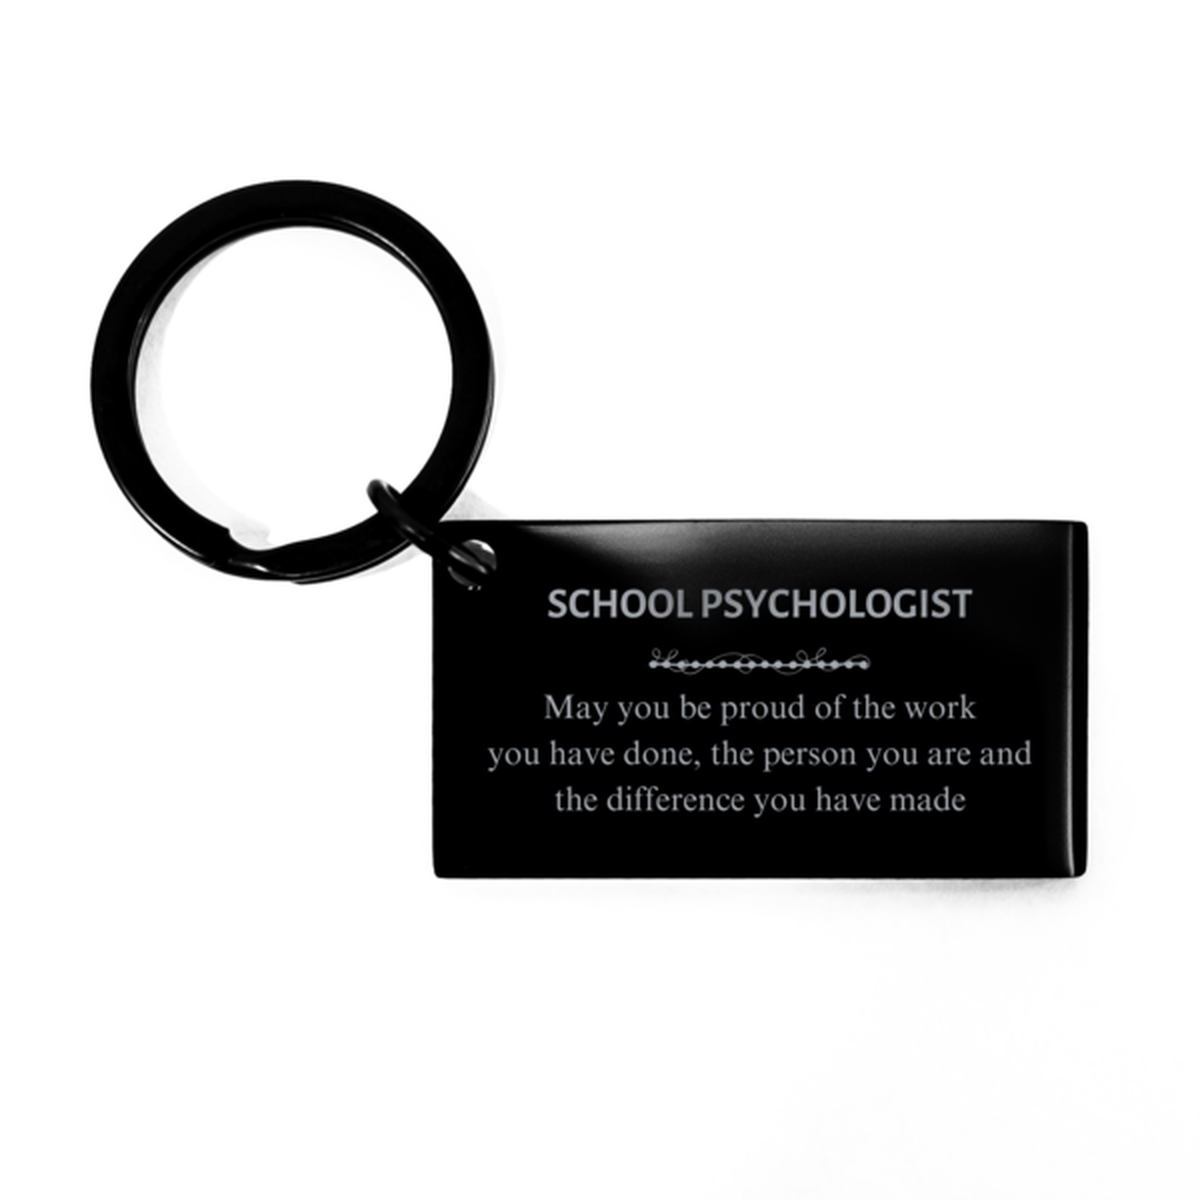 Transcriptionist May you be proud of the work you have done, Retirement School Psychologist Keychain for Colleague Appreciation Gifts Amazing for School Psychologist